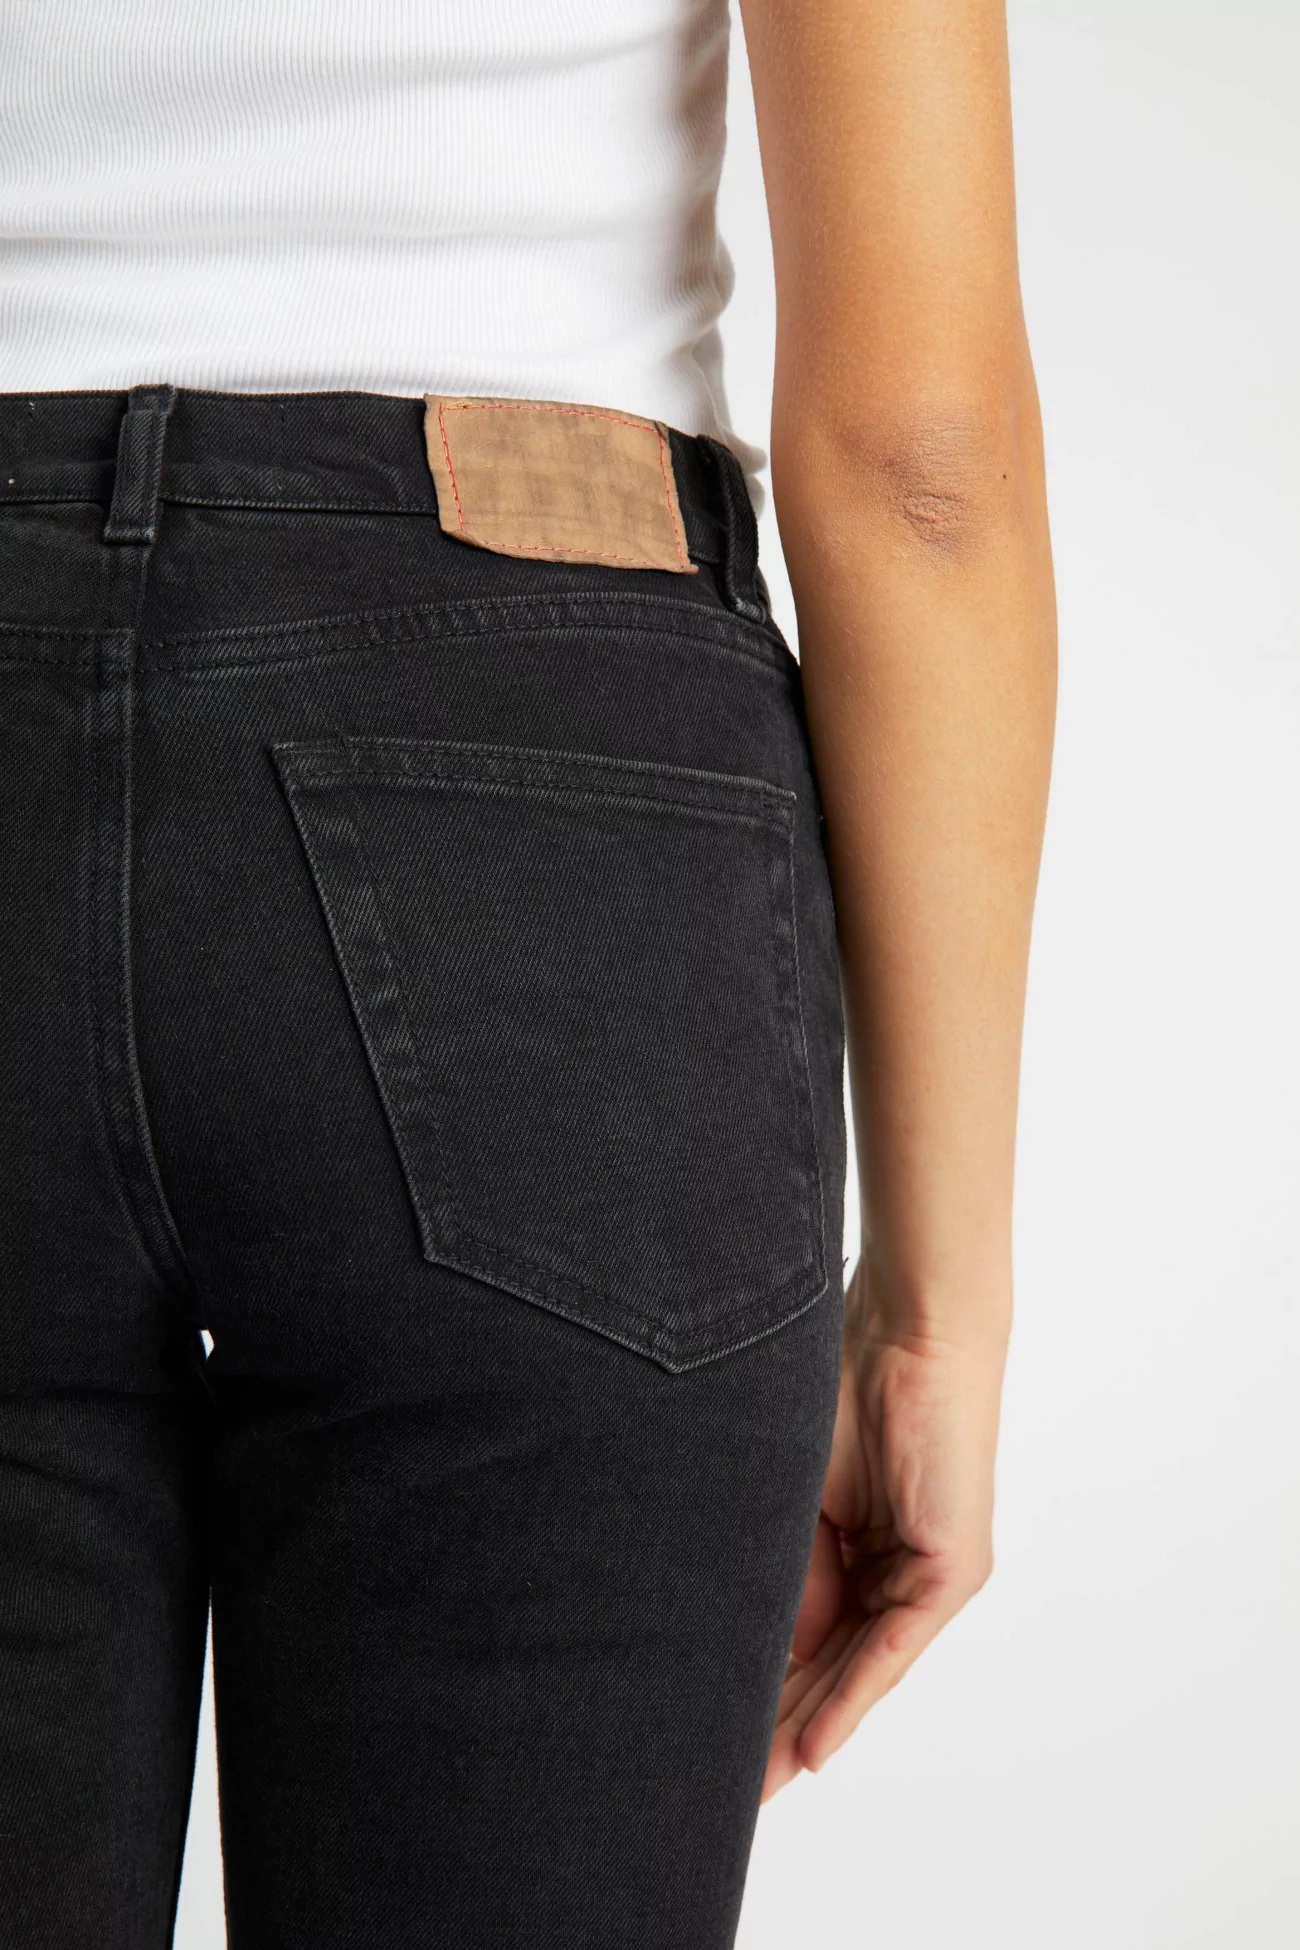 CLASSIC FIT JEANS BLACK 2 WEEKS, JEANERICA